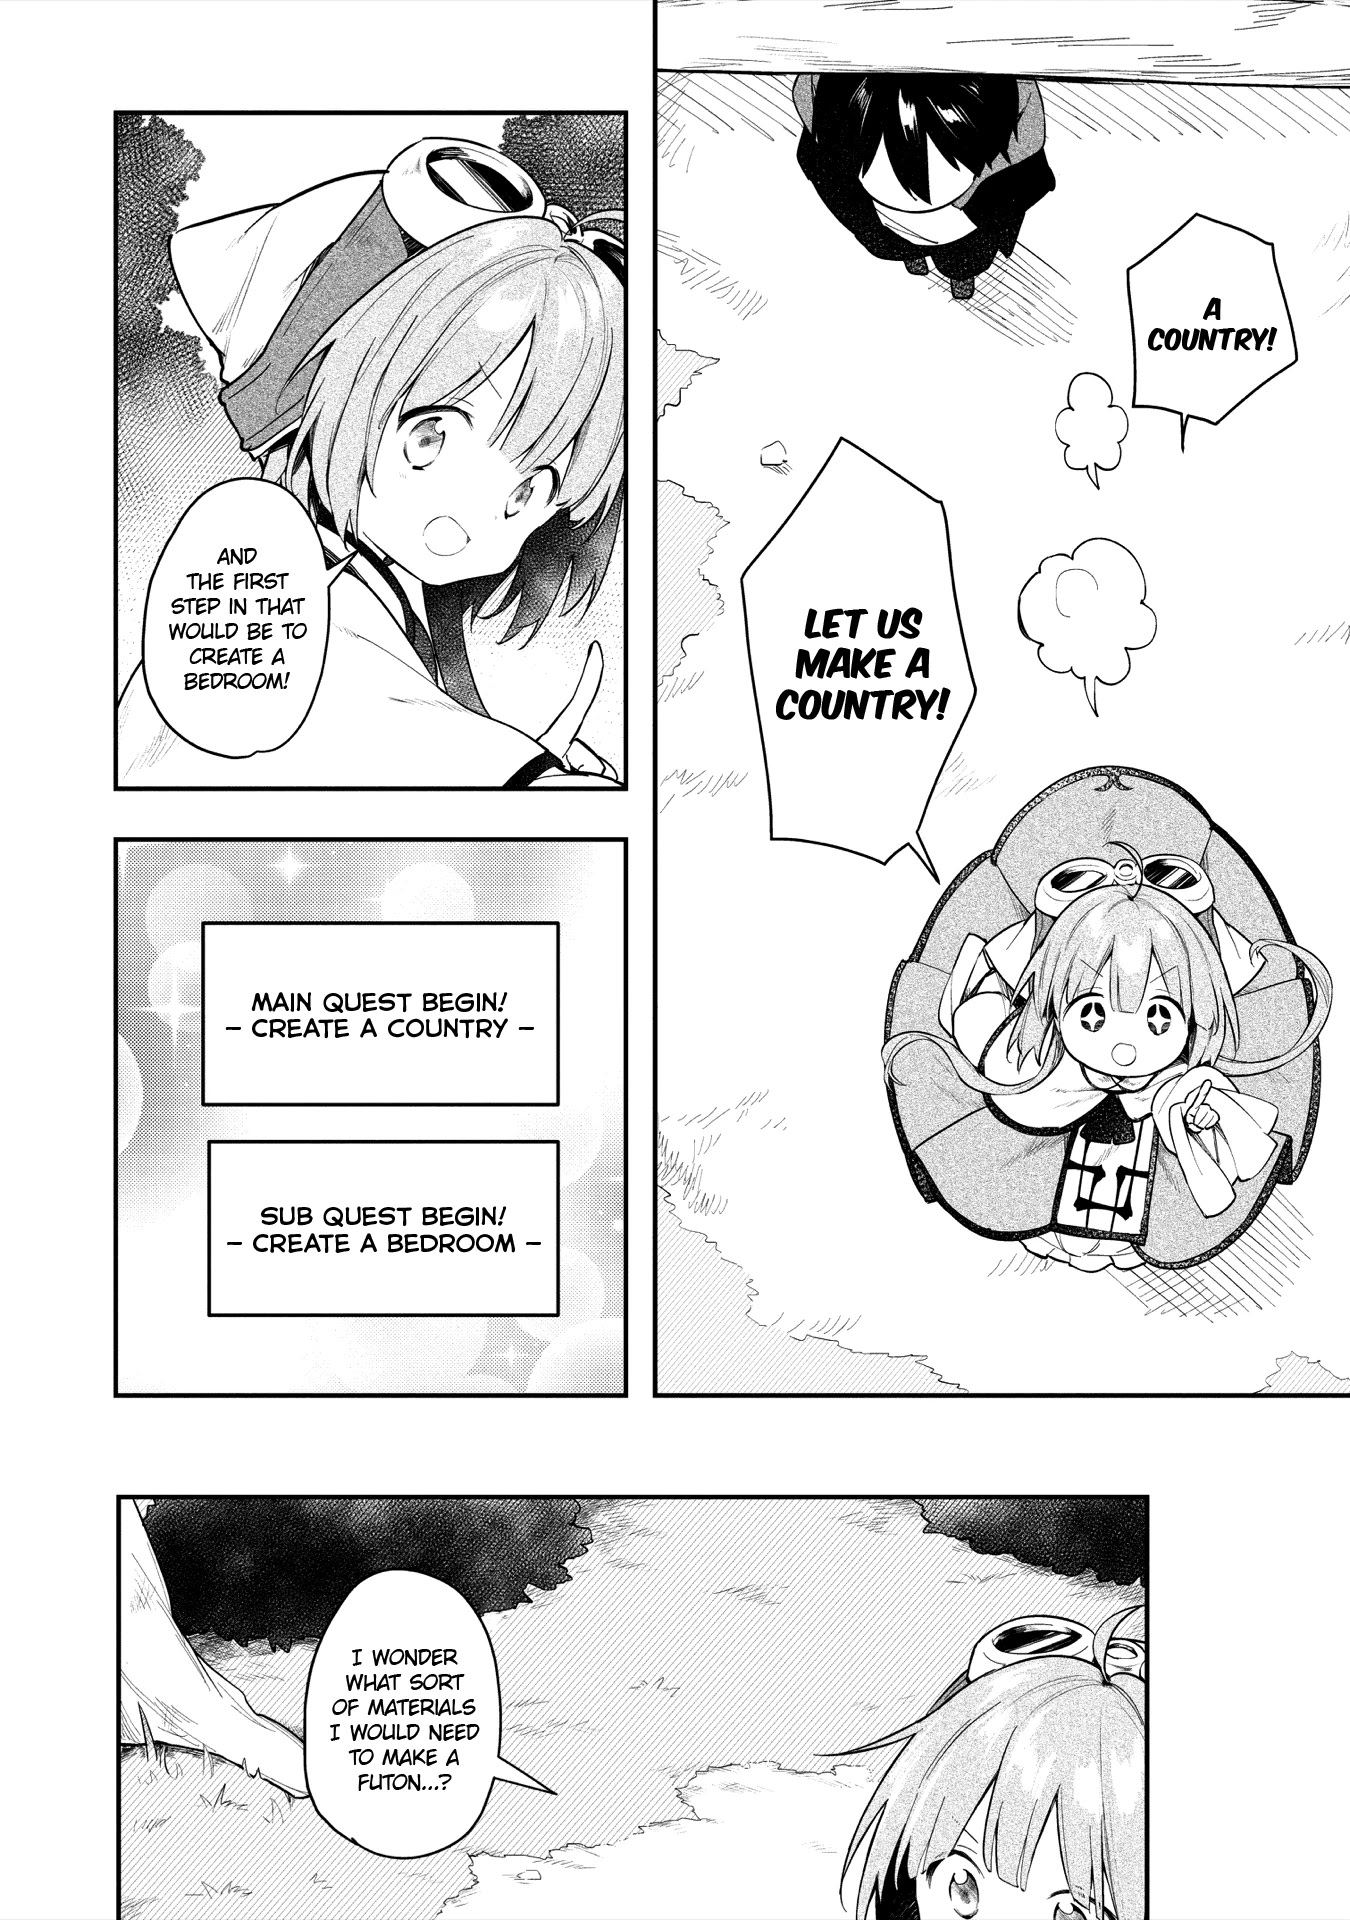 A Ruined Princess And Alternate World Hero Make A Great Country! Chapter 3 #18